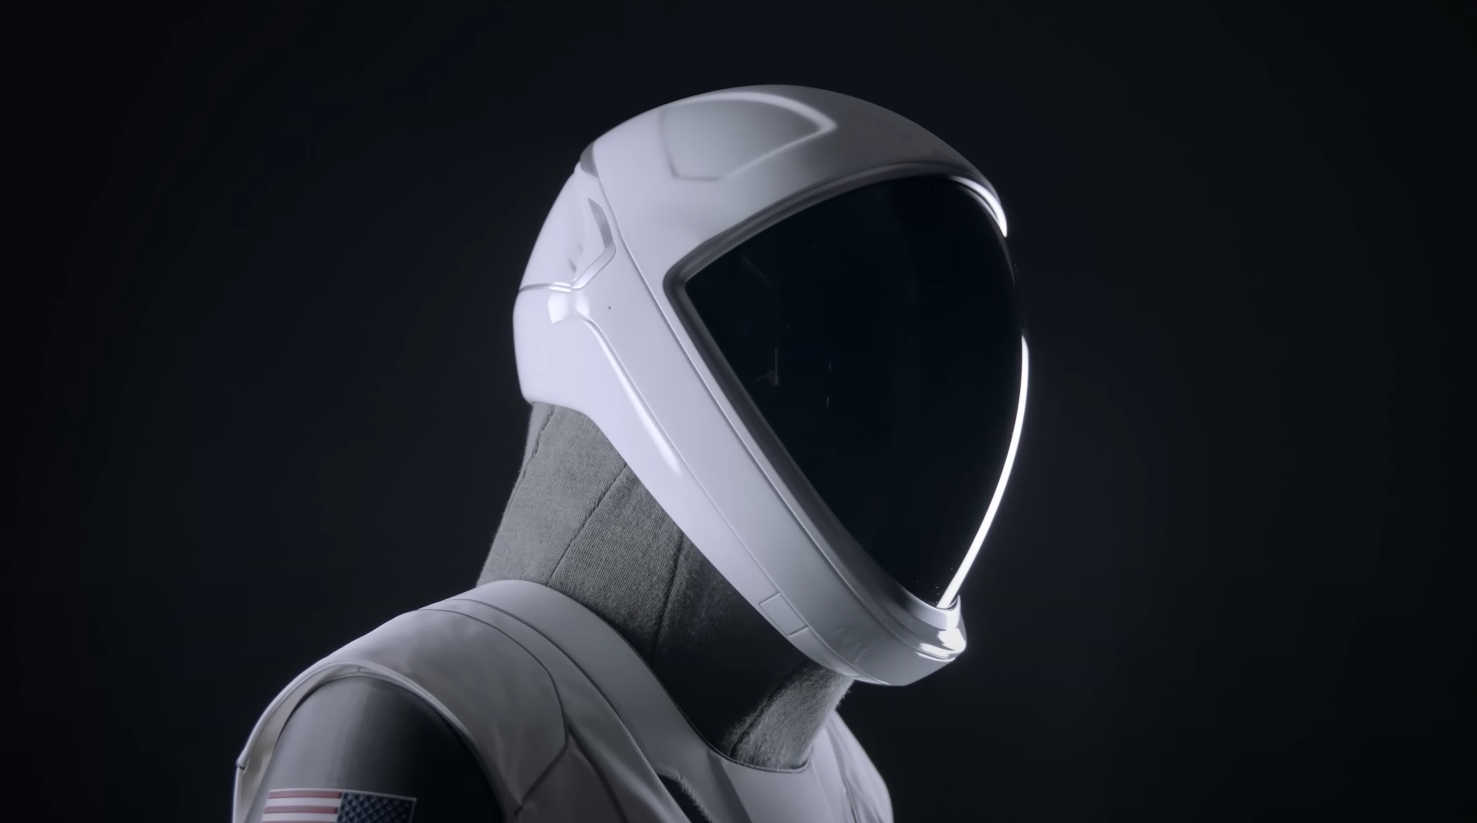 SpaceX revealed the suits